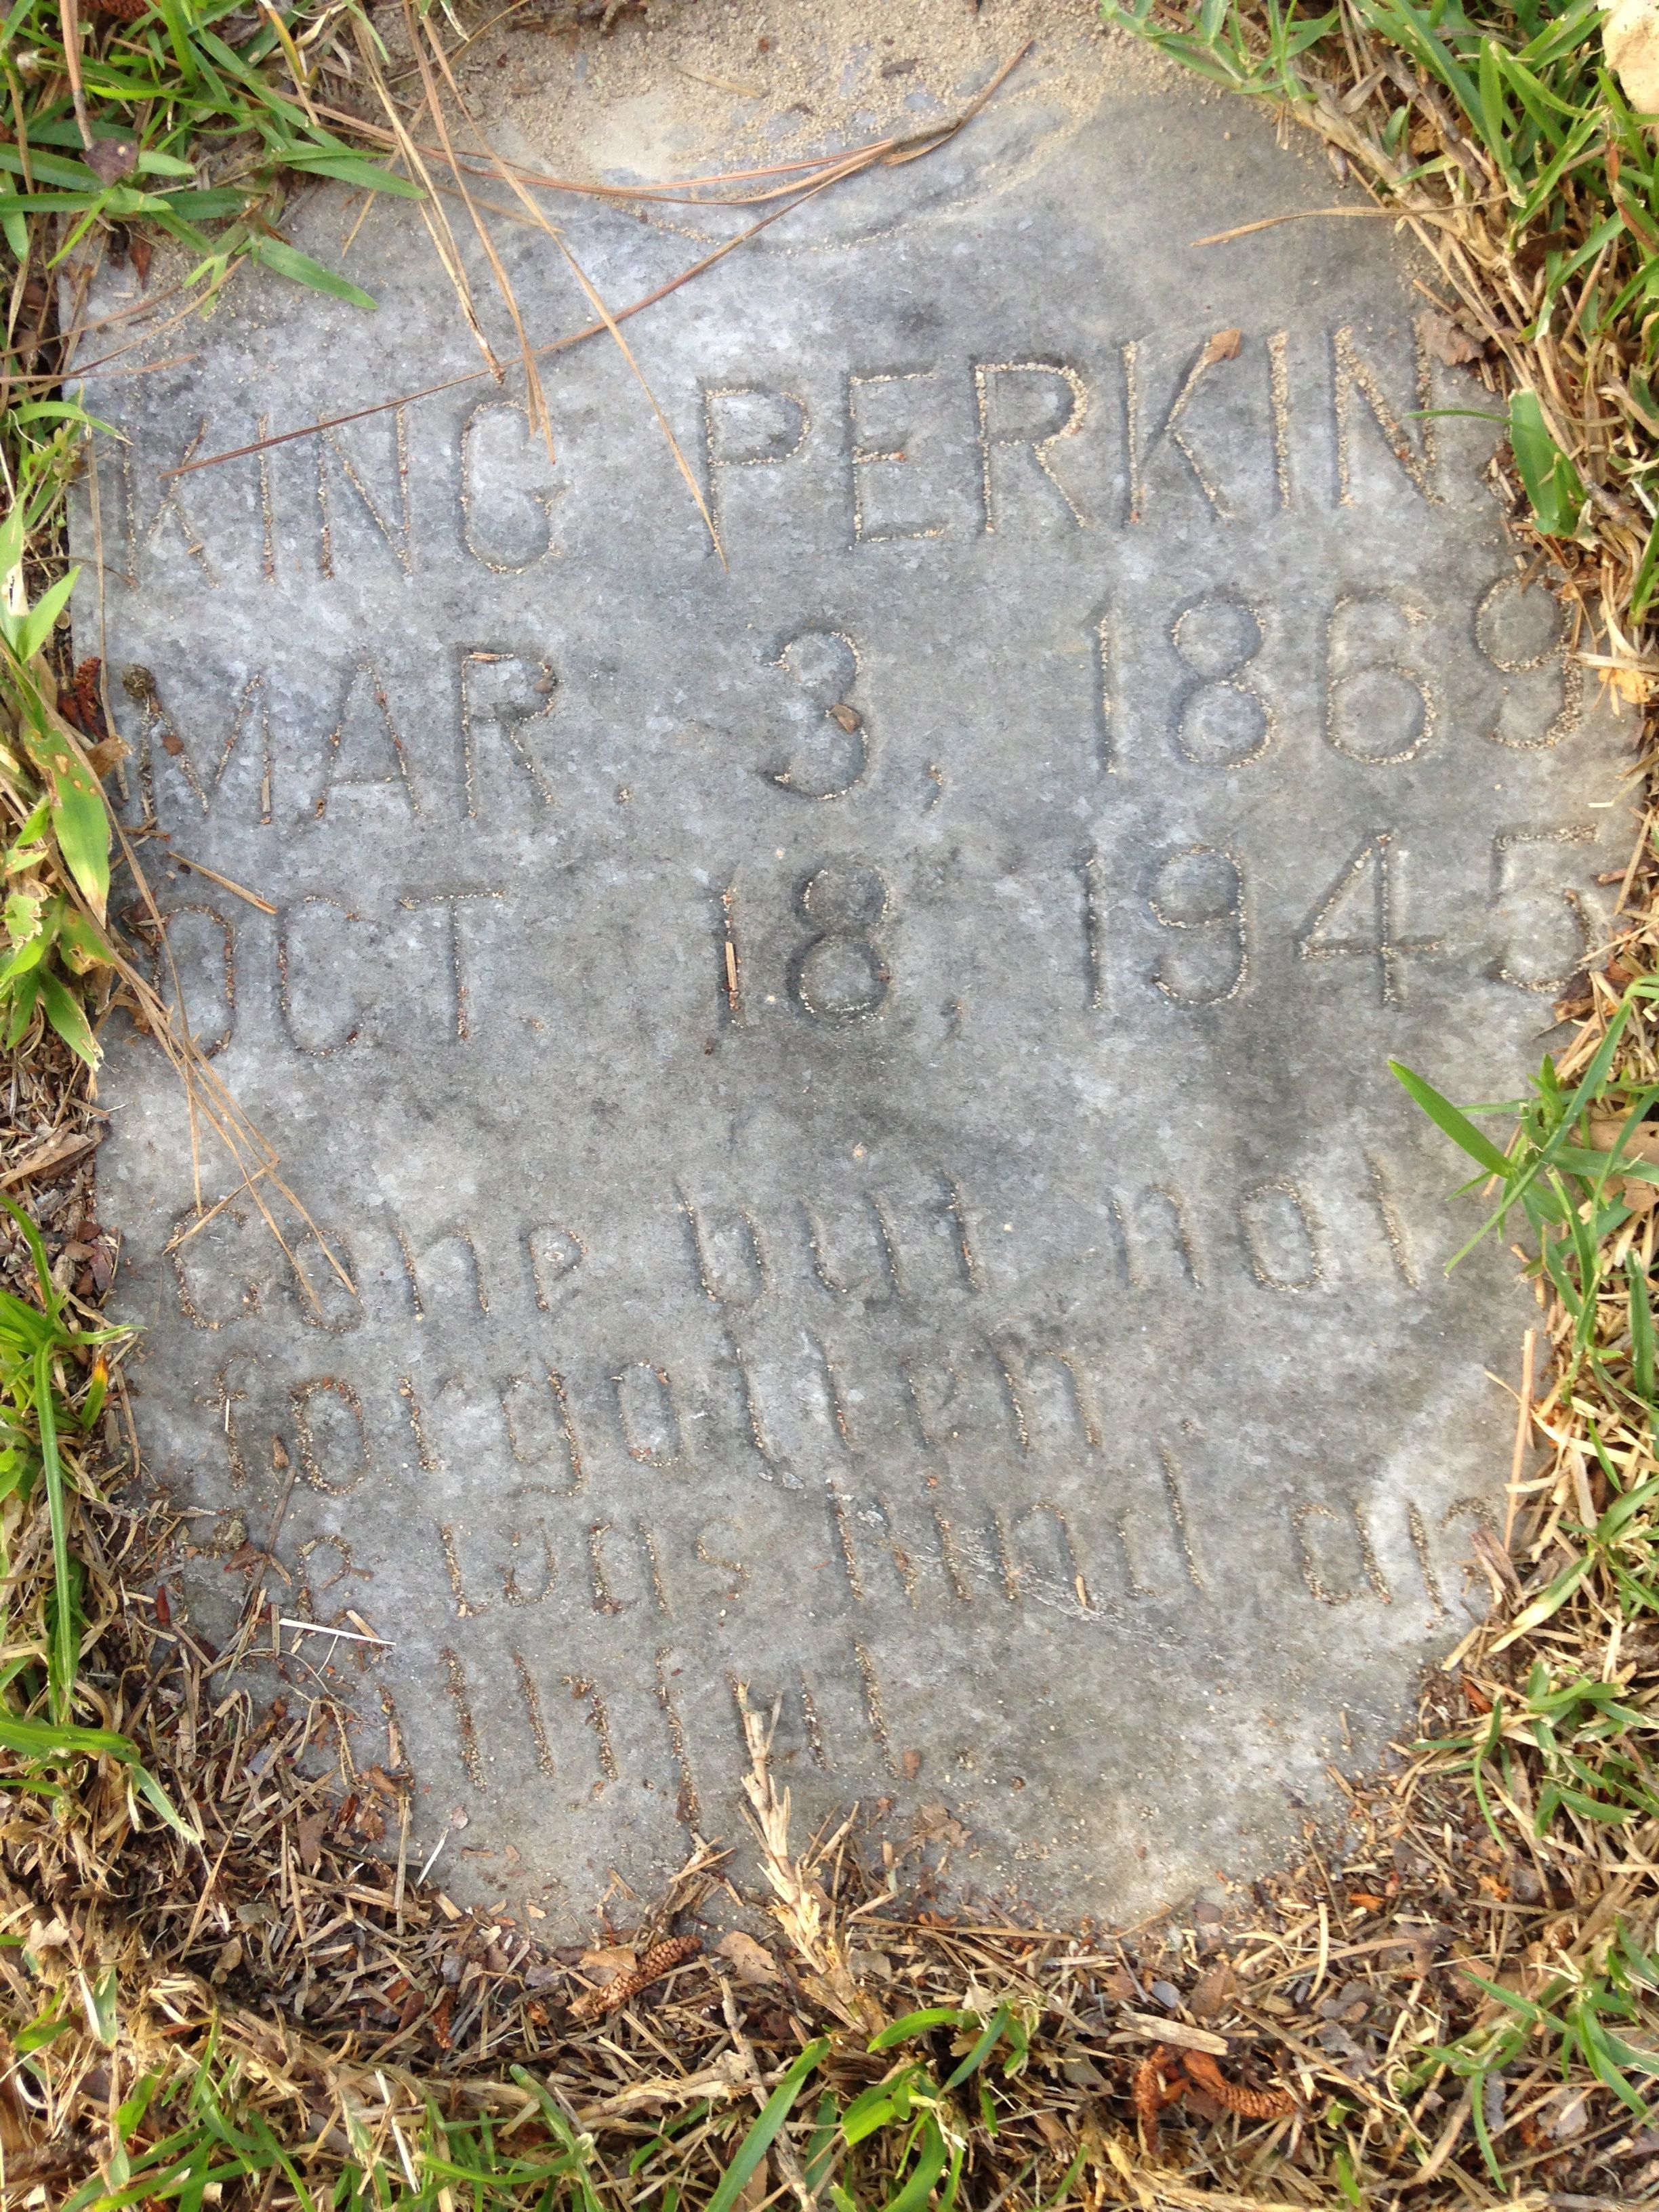 The grave of King Perkins, Jr., son of King, brother of Edward.